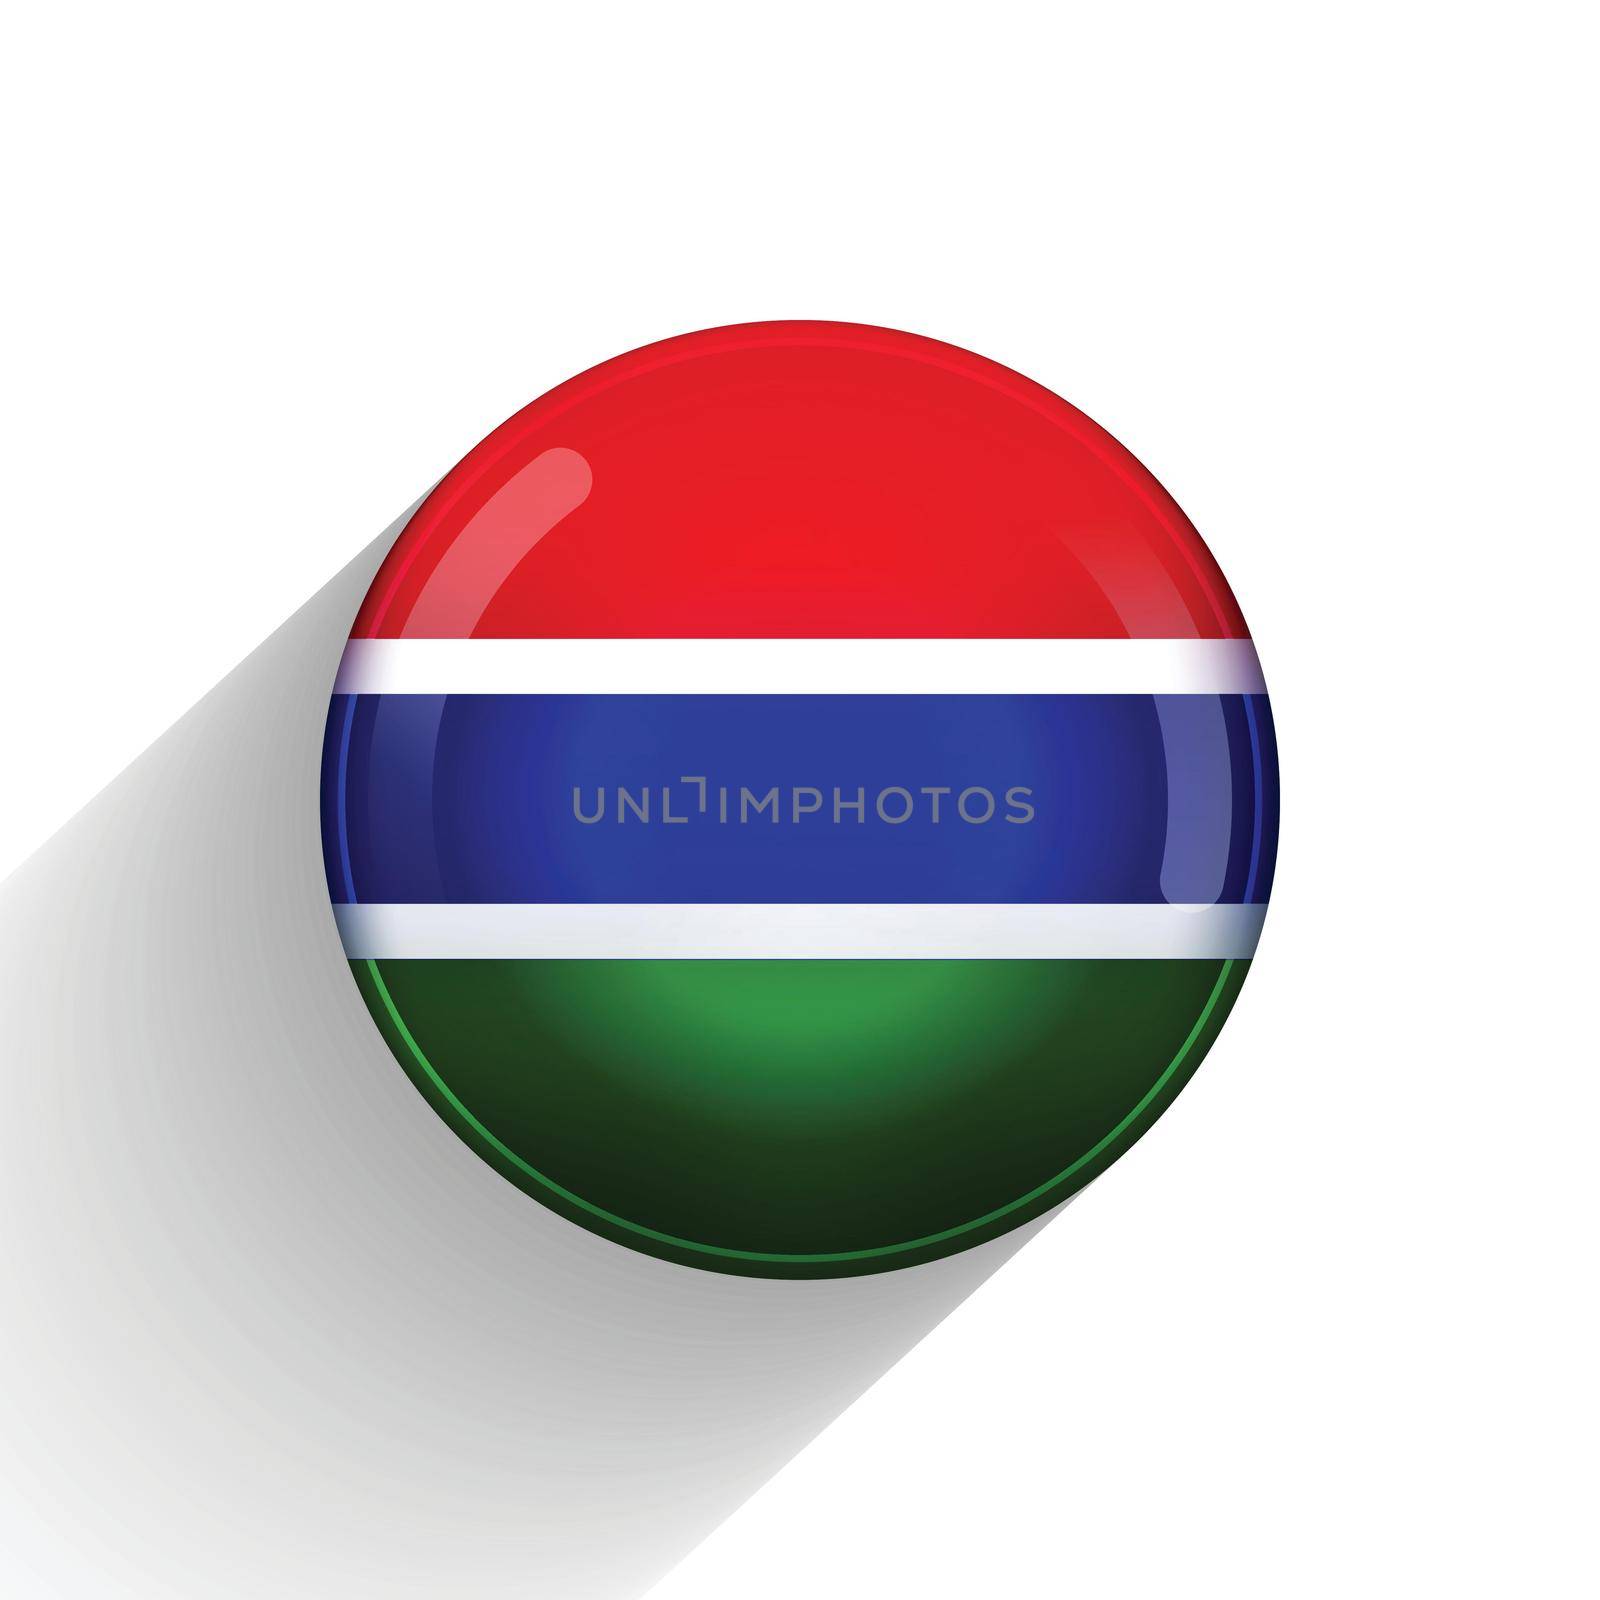 Glass light ball with flag of Gambia. Round sphere, template icon. Gambian national symbol. Glossy realistic ball, 3D abstract vector illustration highlighted on a white background. Big bubble.